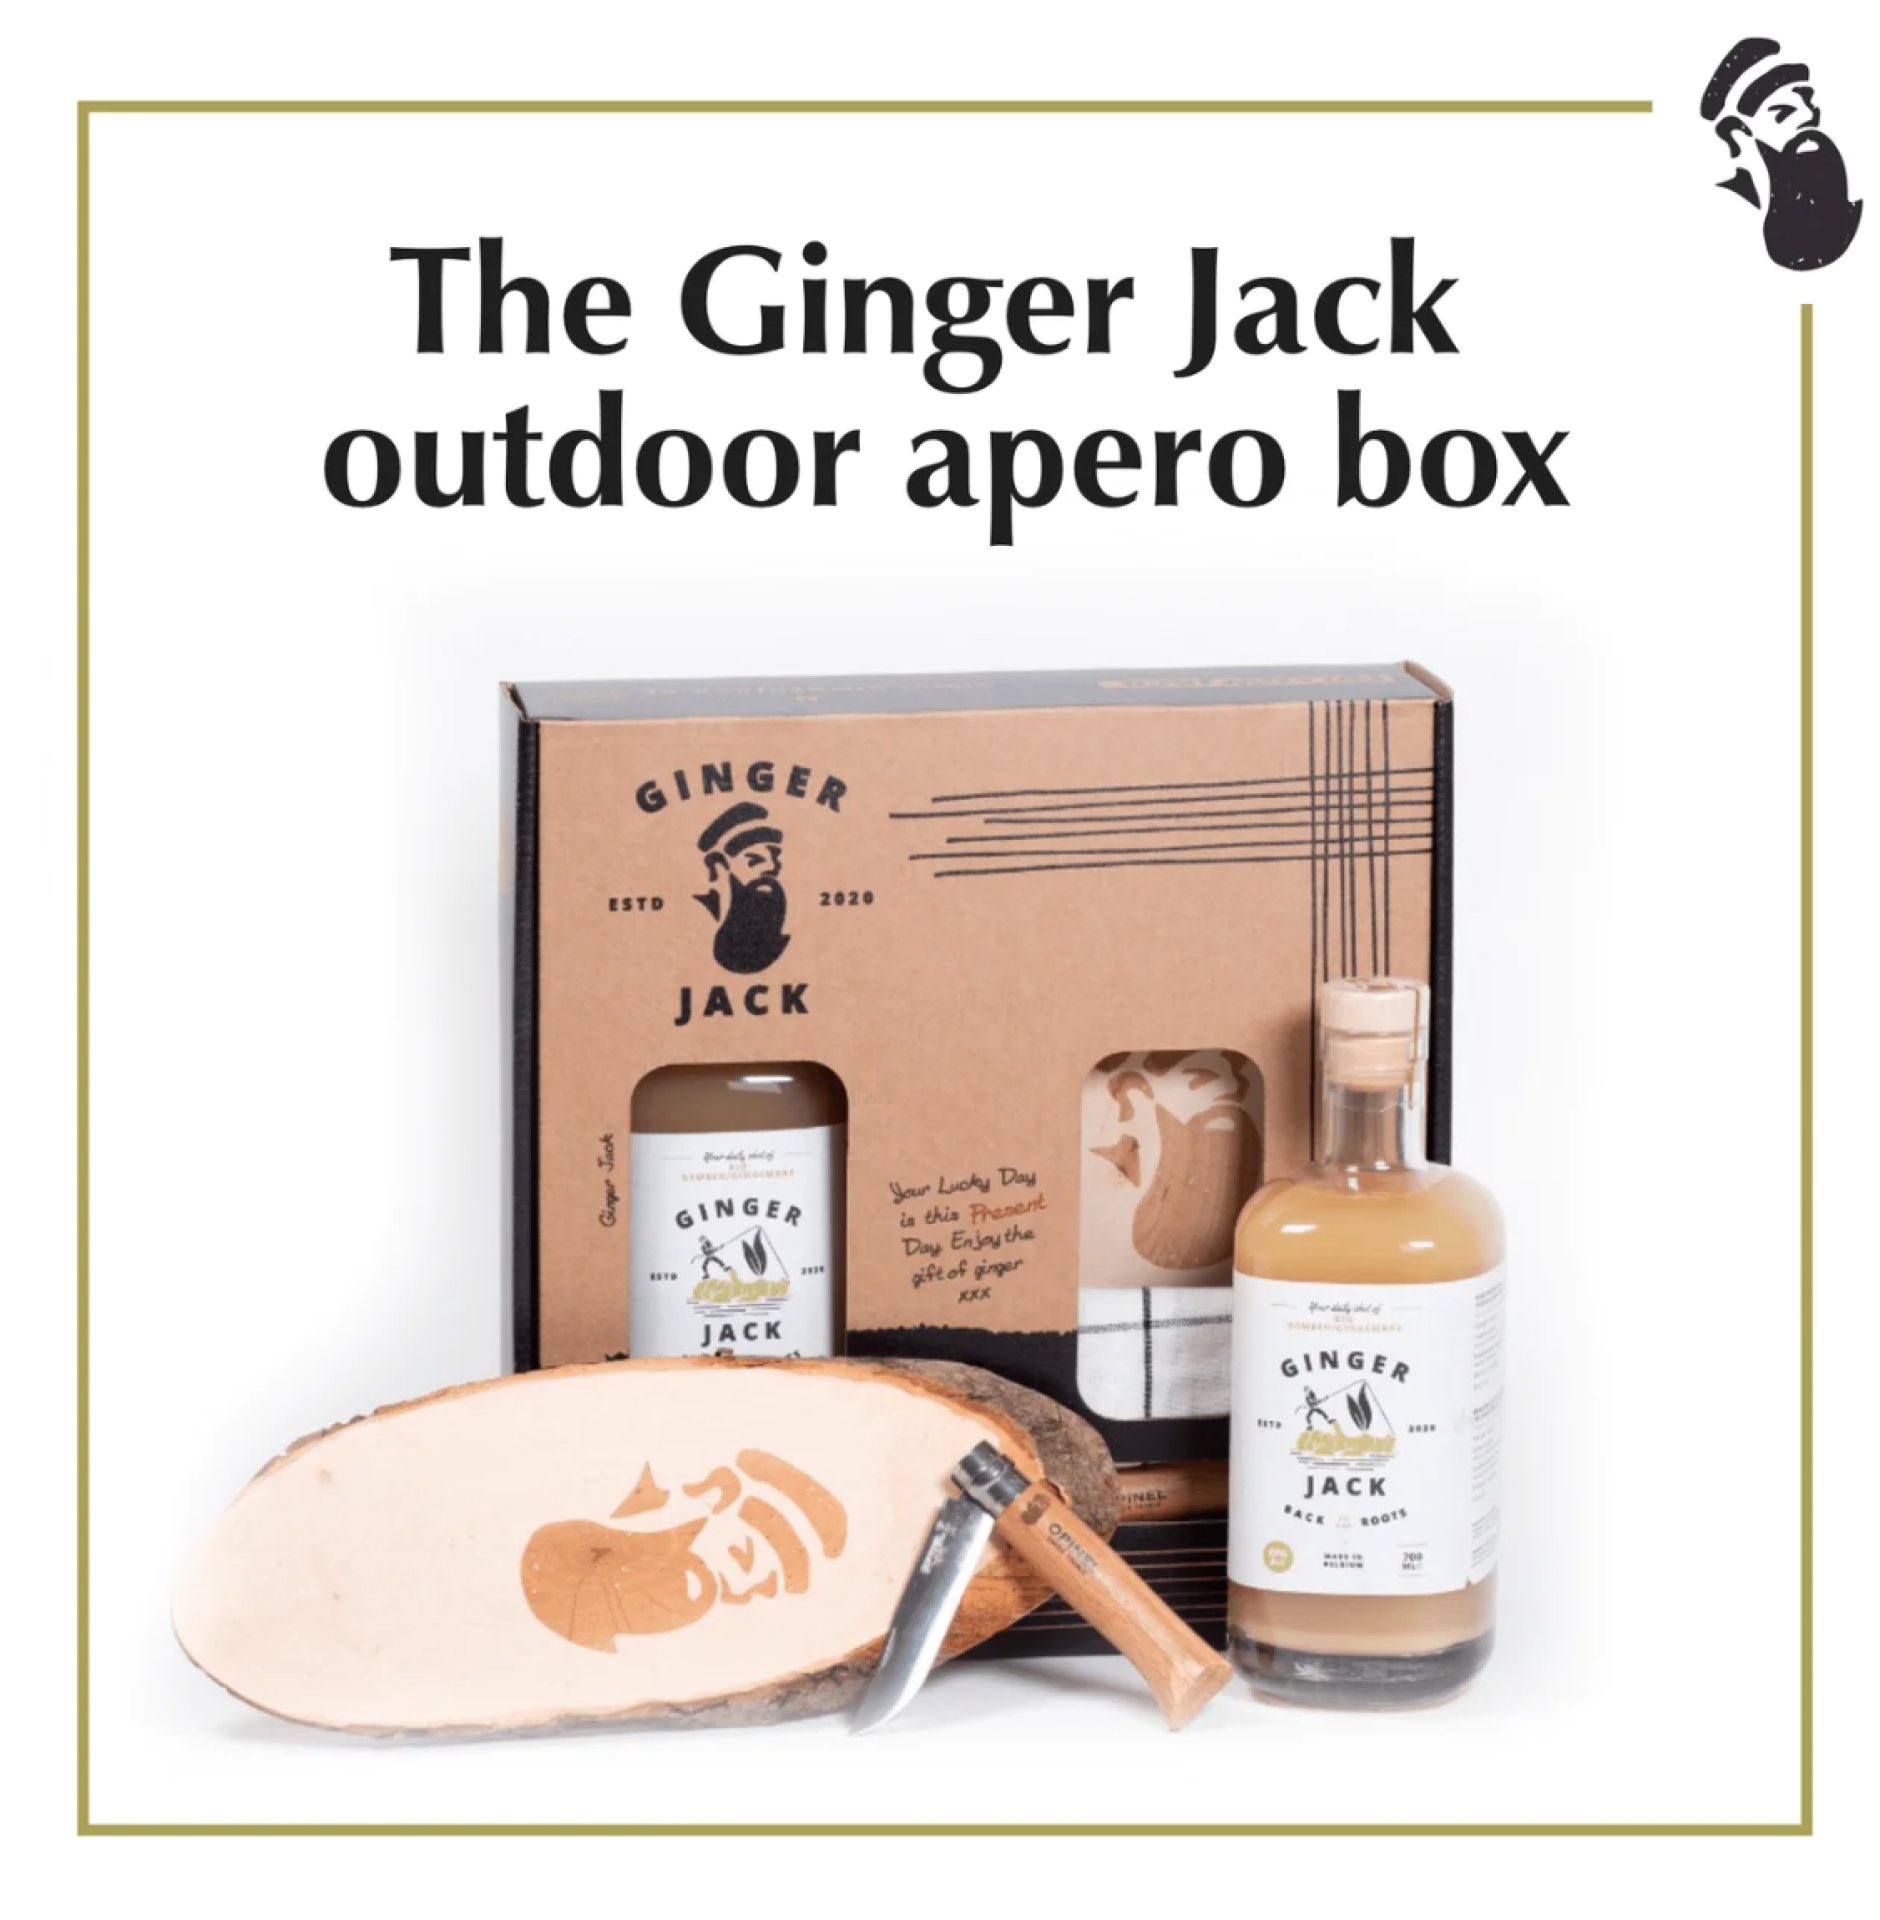 THE GINGER JACK OUTDOOR APERO BOX